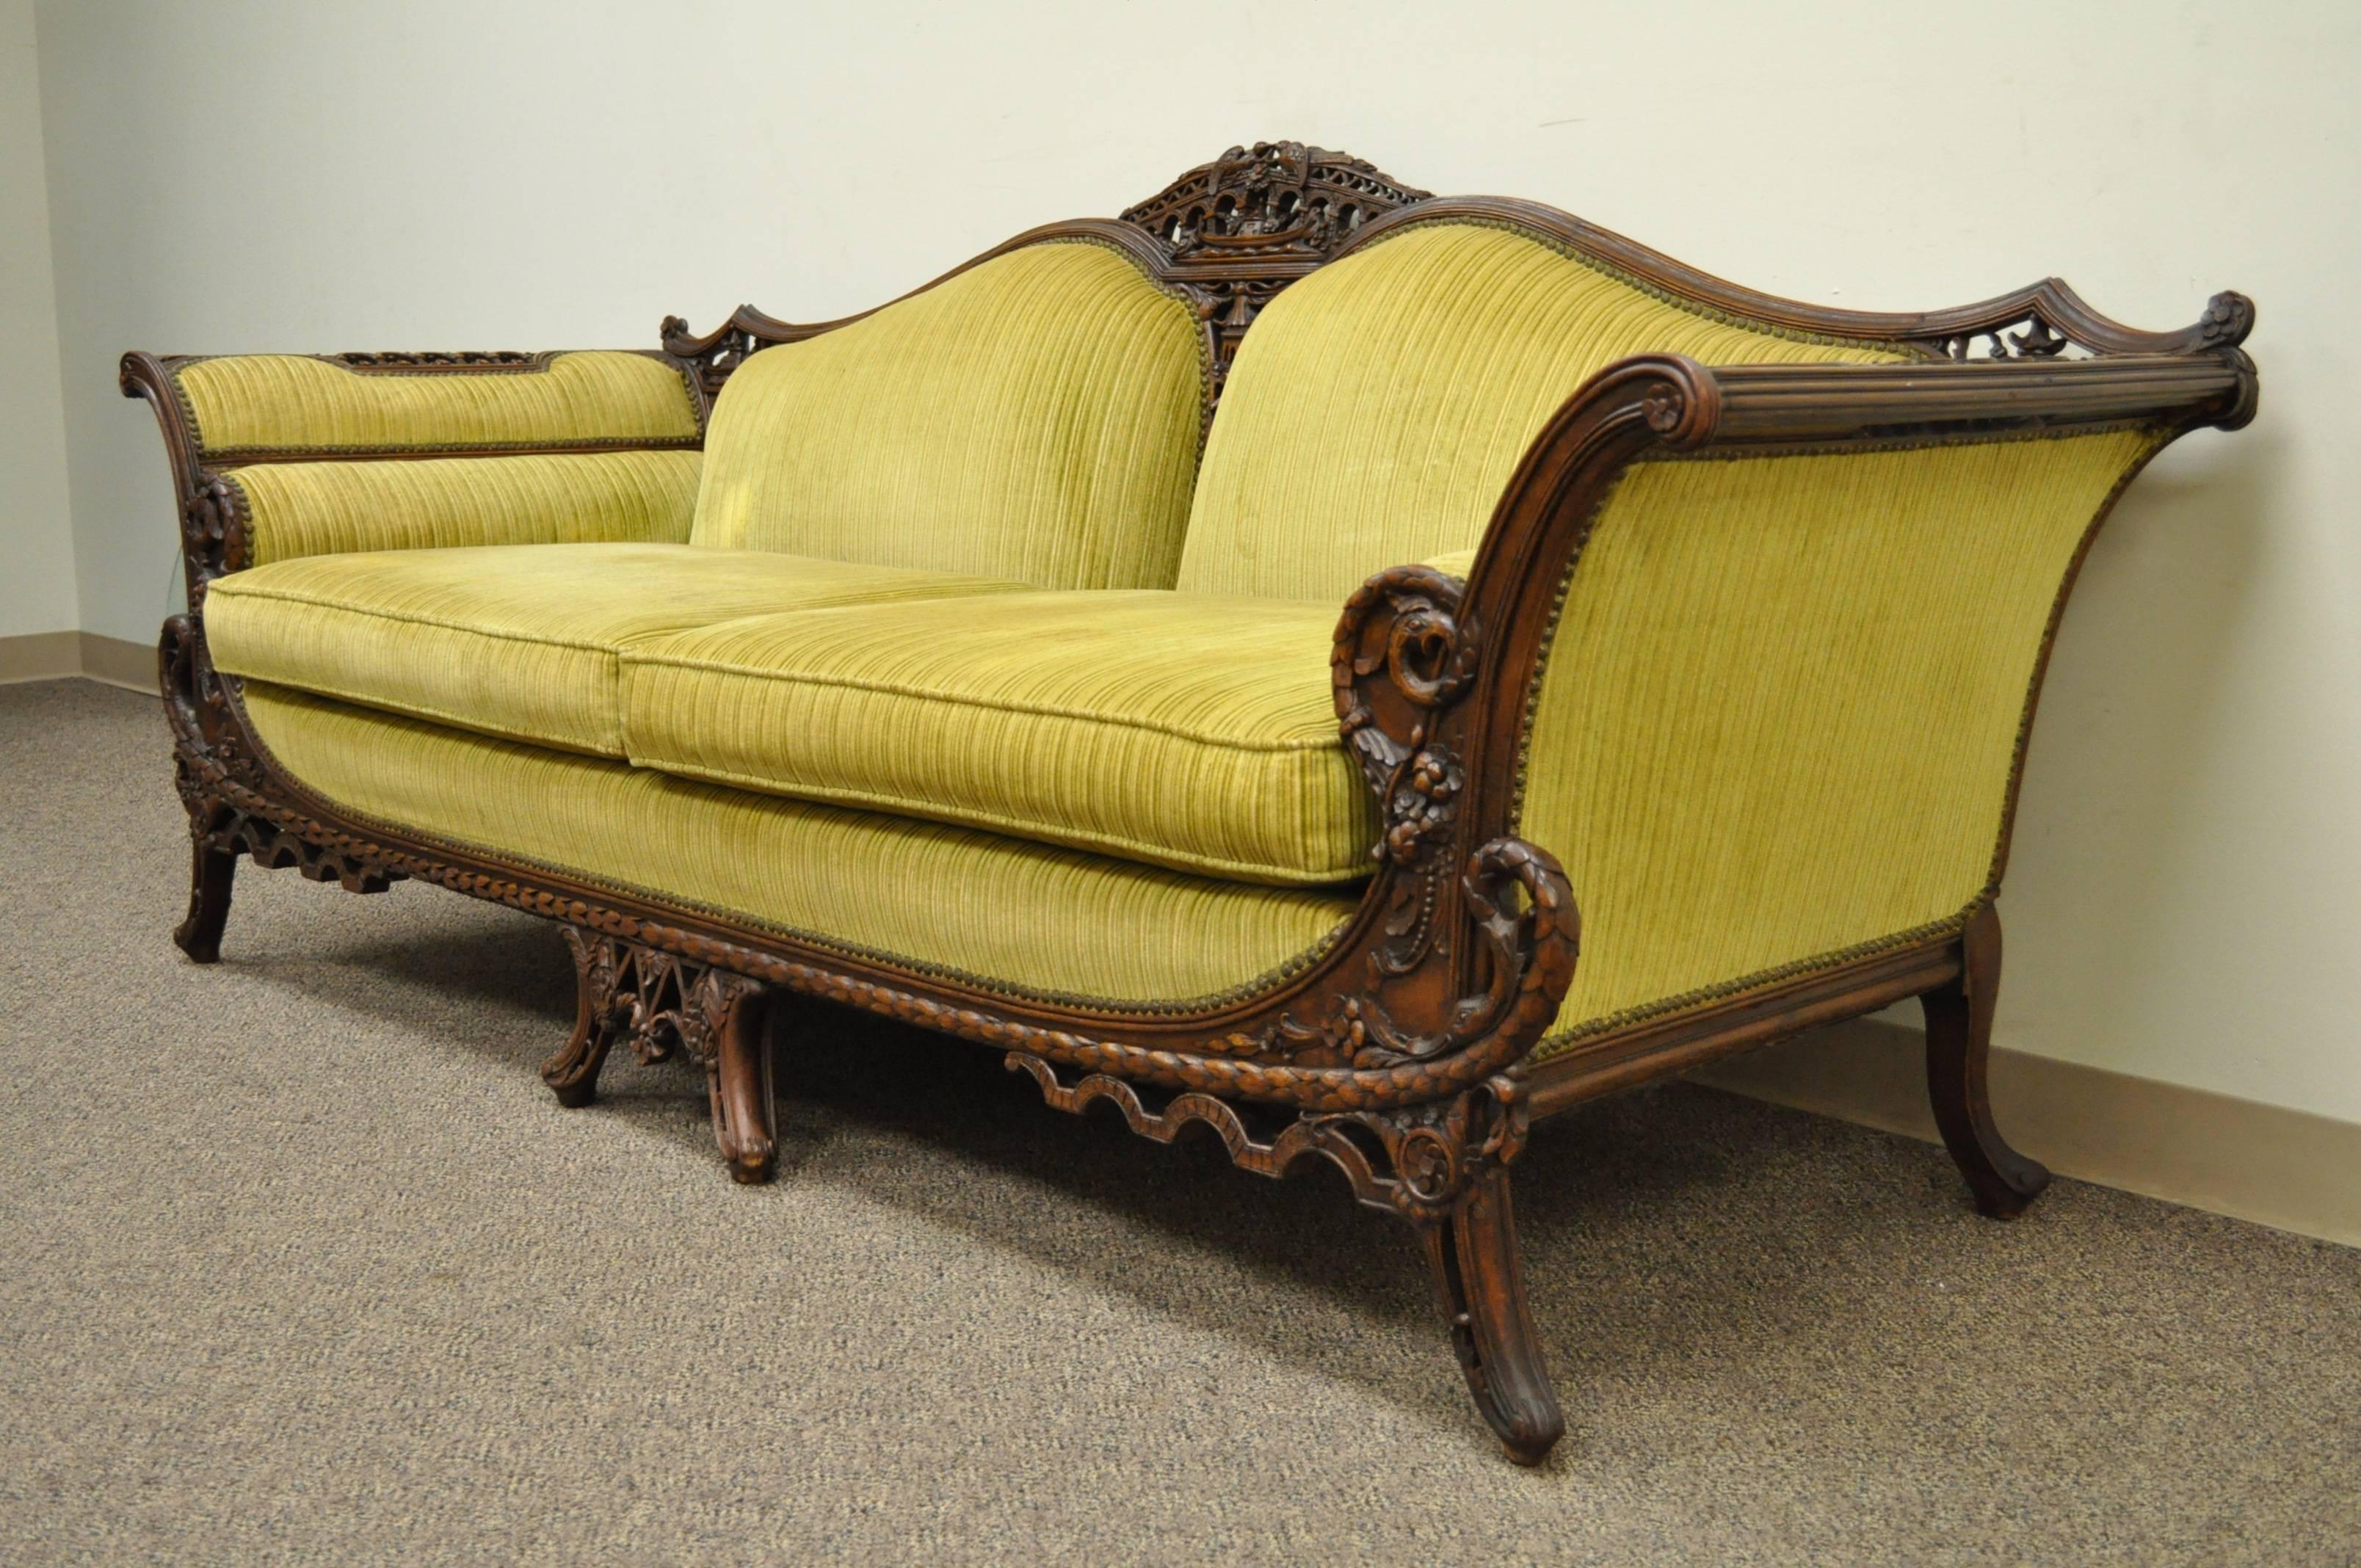 Remarkable, hand-carved, Mahogany sofa from the early 20th century in the transitional Chinese Chippendale style. Item features a number of very fine and detailed carvings including, birds, serpents, swan heads, cornucopia, pagodas and other flowers